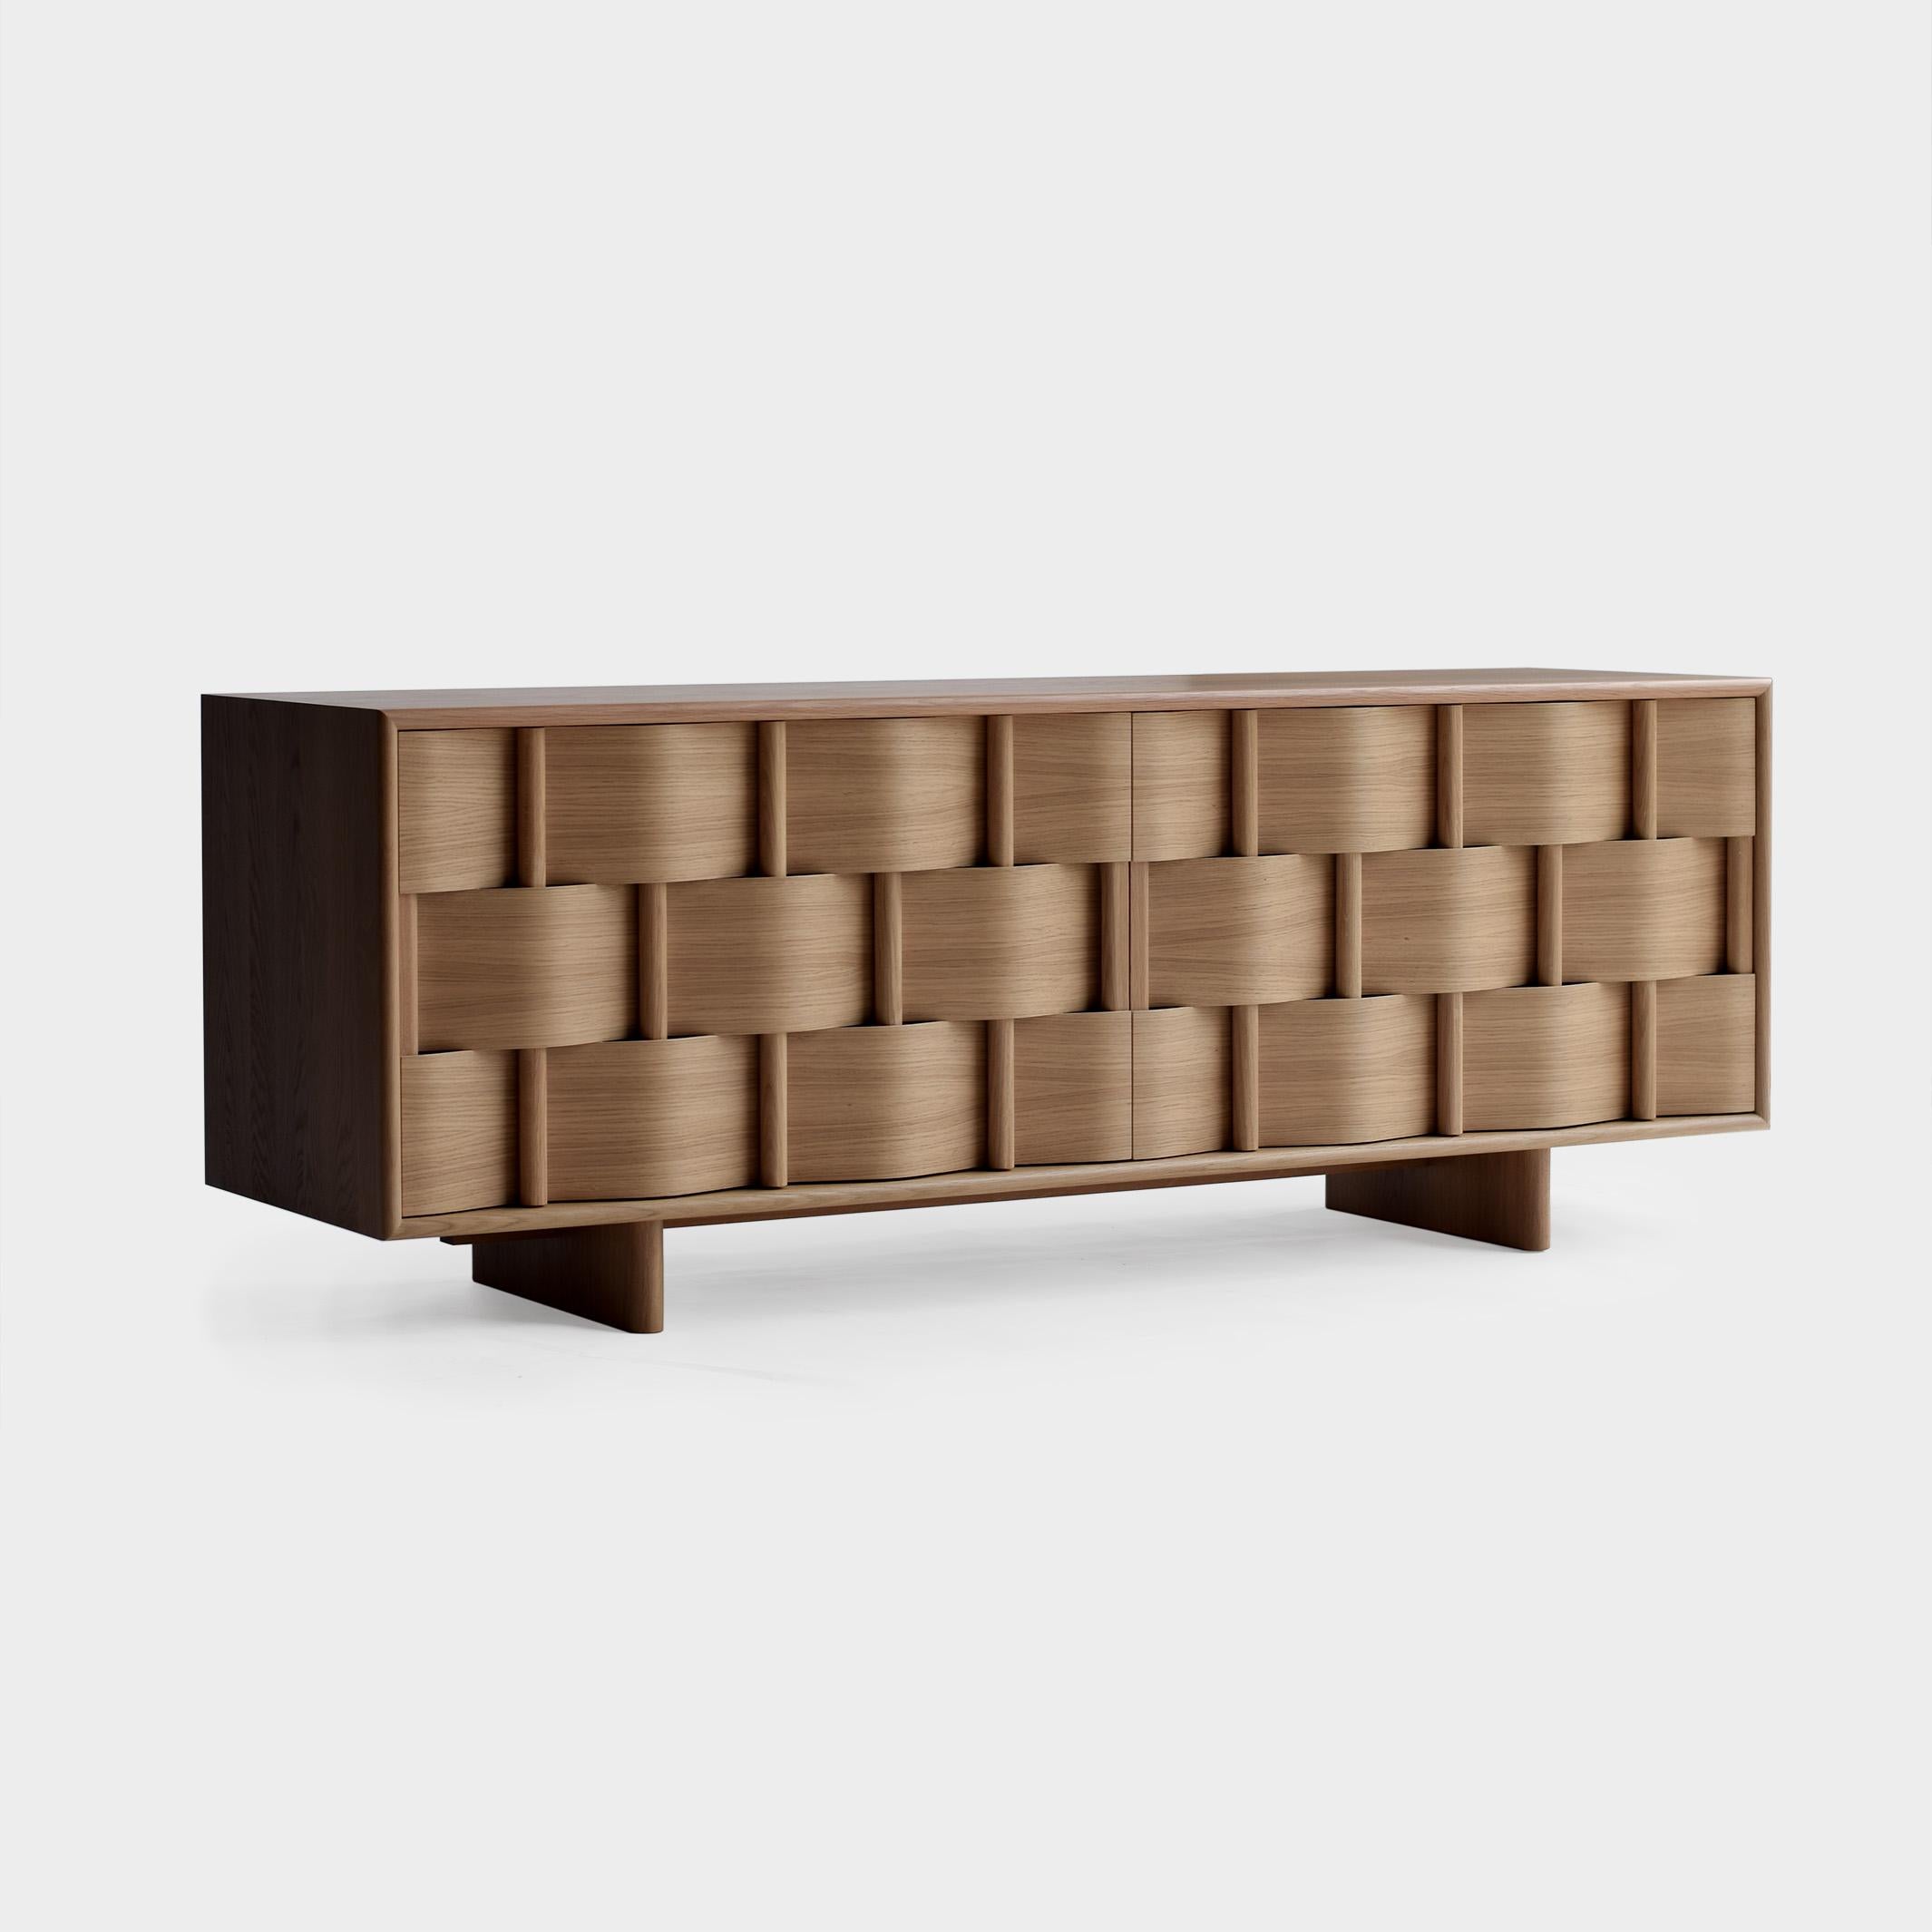 Weave frame 
Sideboard, made of solid wood and laminated veneér. Modern yet classic, bold yet modest the cabinet serves as a great example of scandinavian contemporary design. Designed by Lukas Dahlén.

The minimal yet expressive sideboard weave is